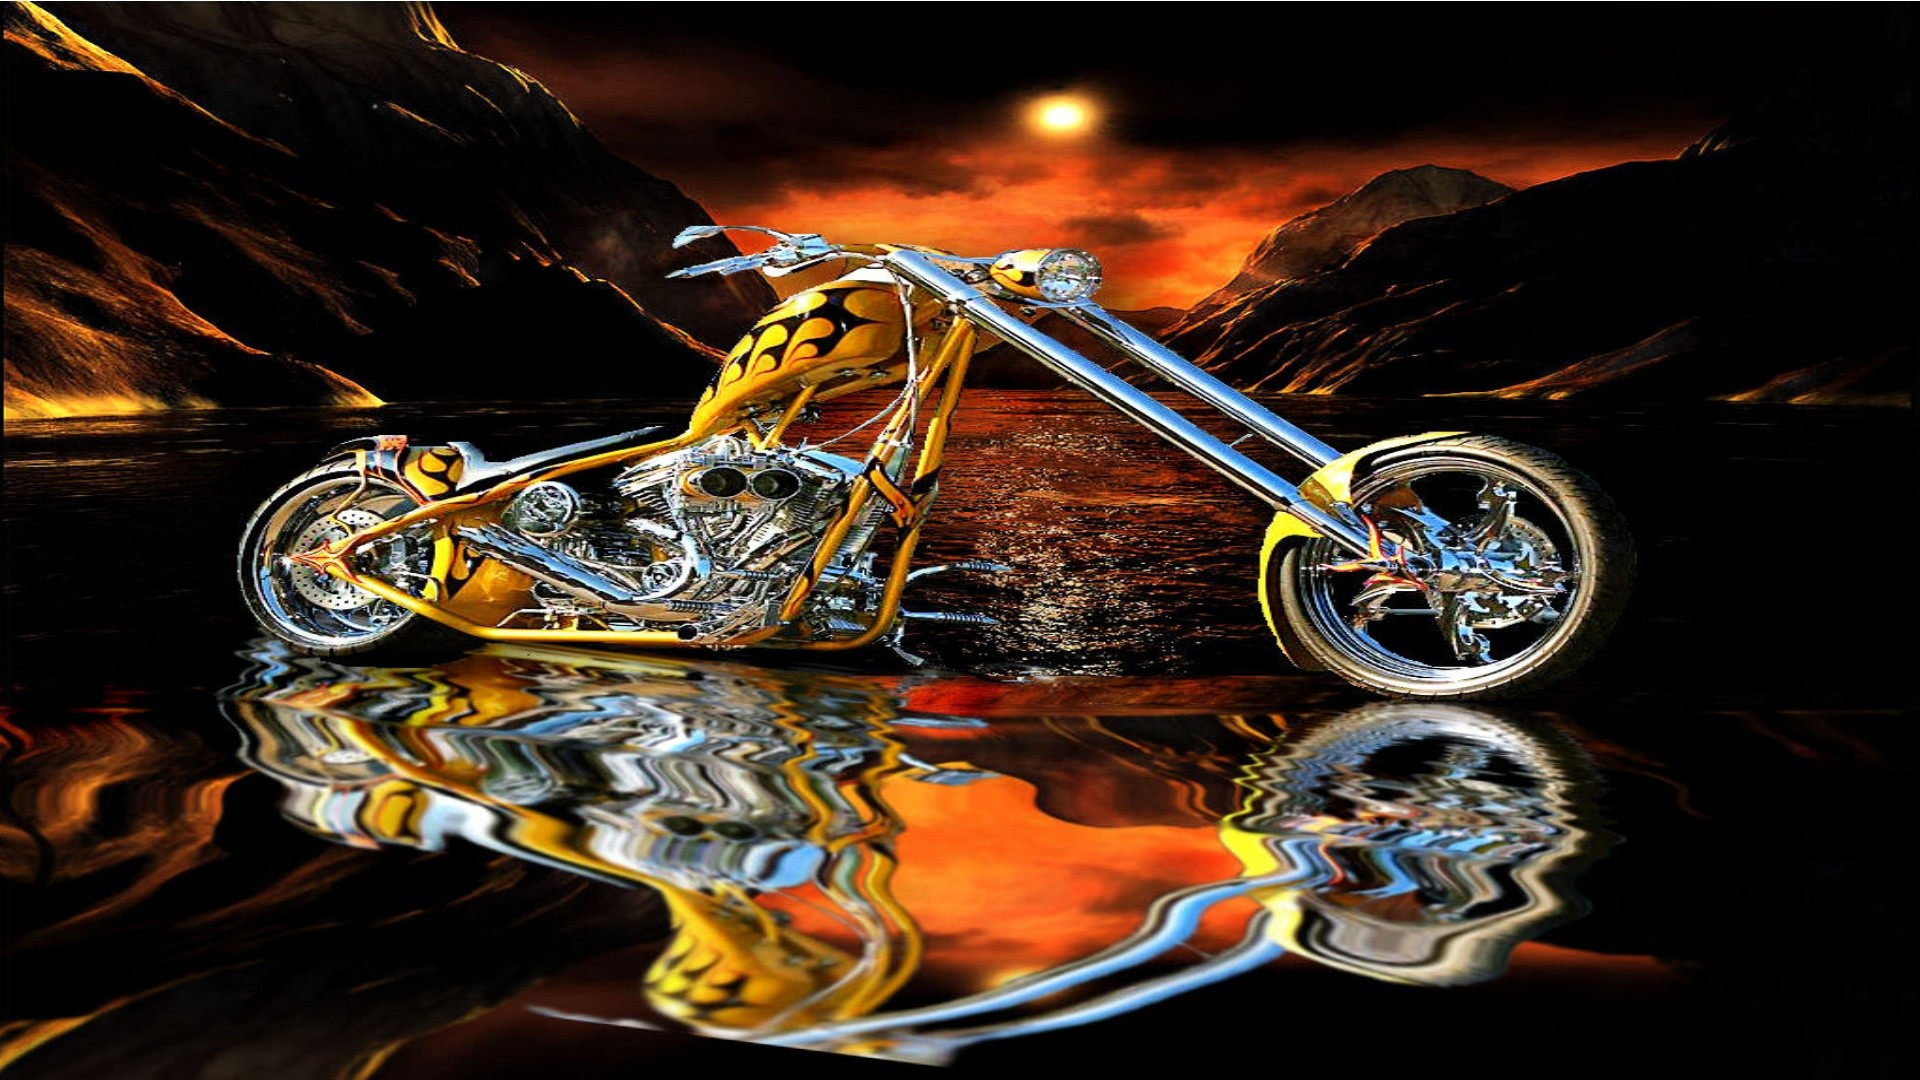 1920x1080 Explore and share Chopper Girls Motorcycle Wallpaper on WallpaperSafari